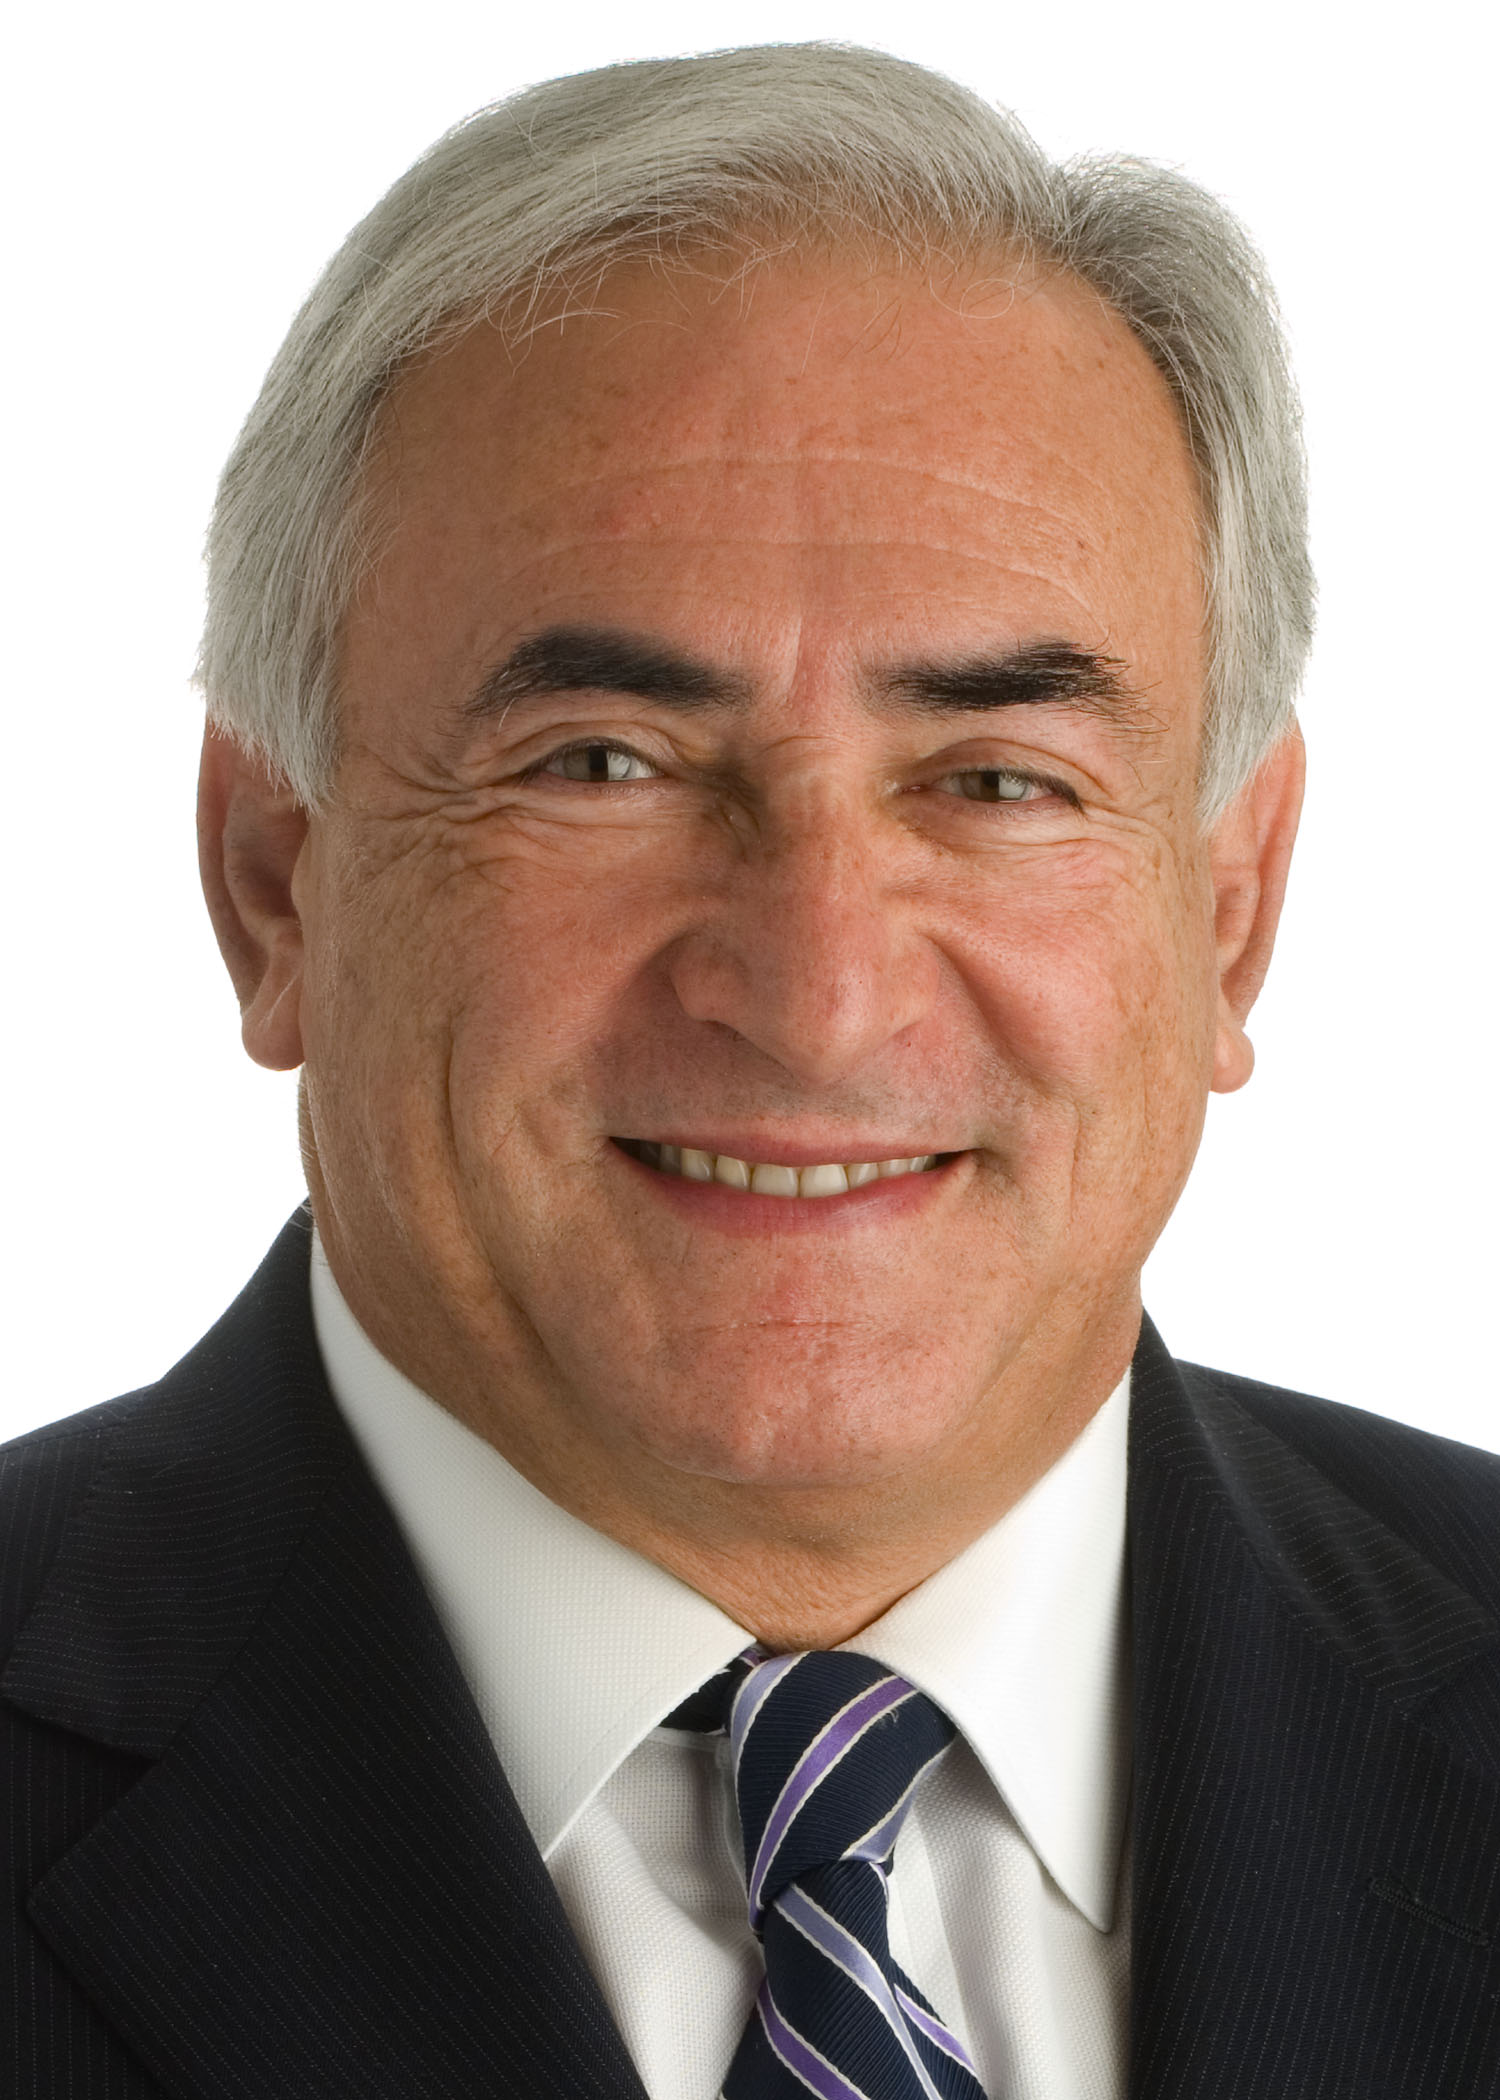 Dominique Strauss-Kahn is the 10th managing director of the IMF.